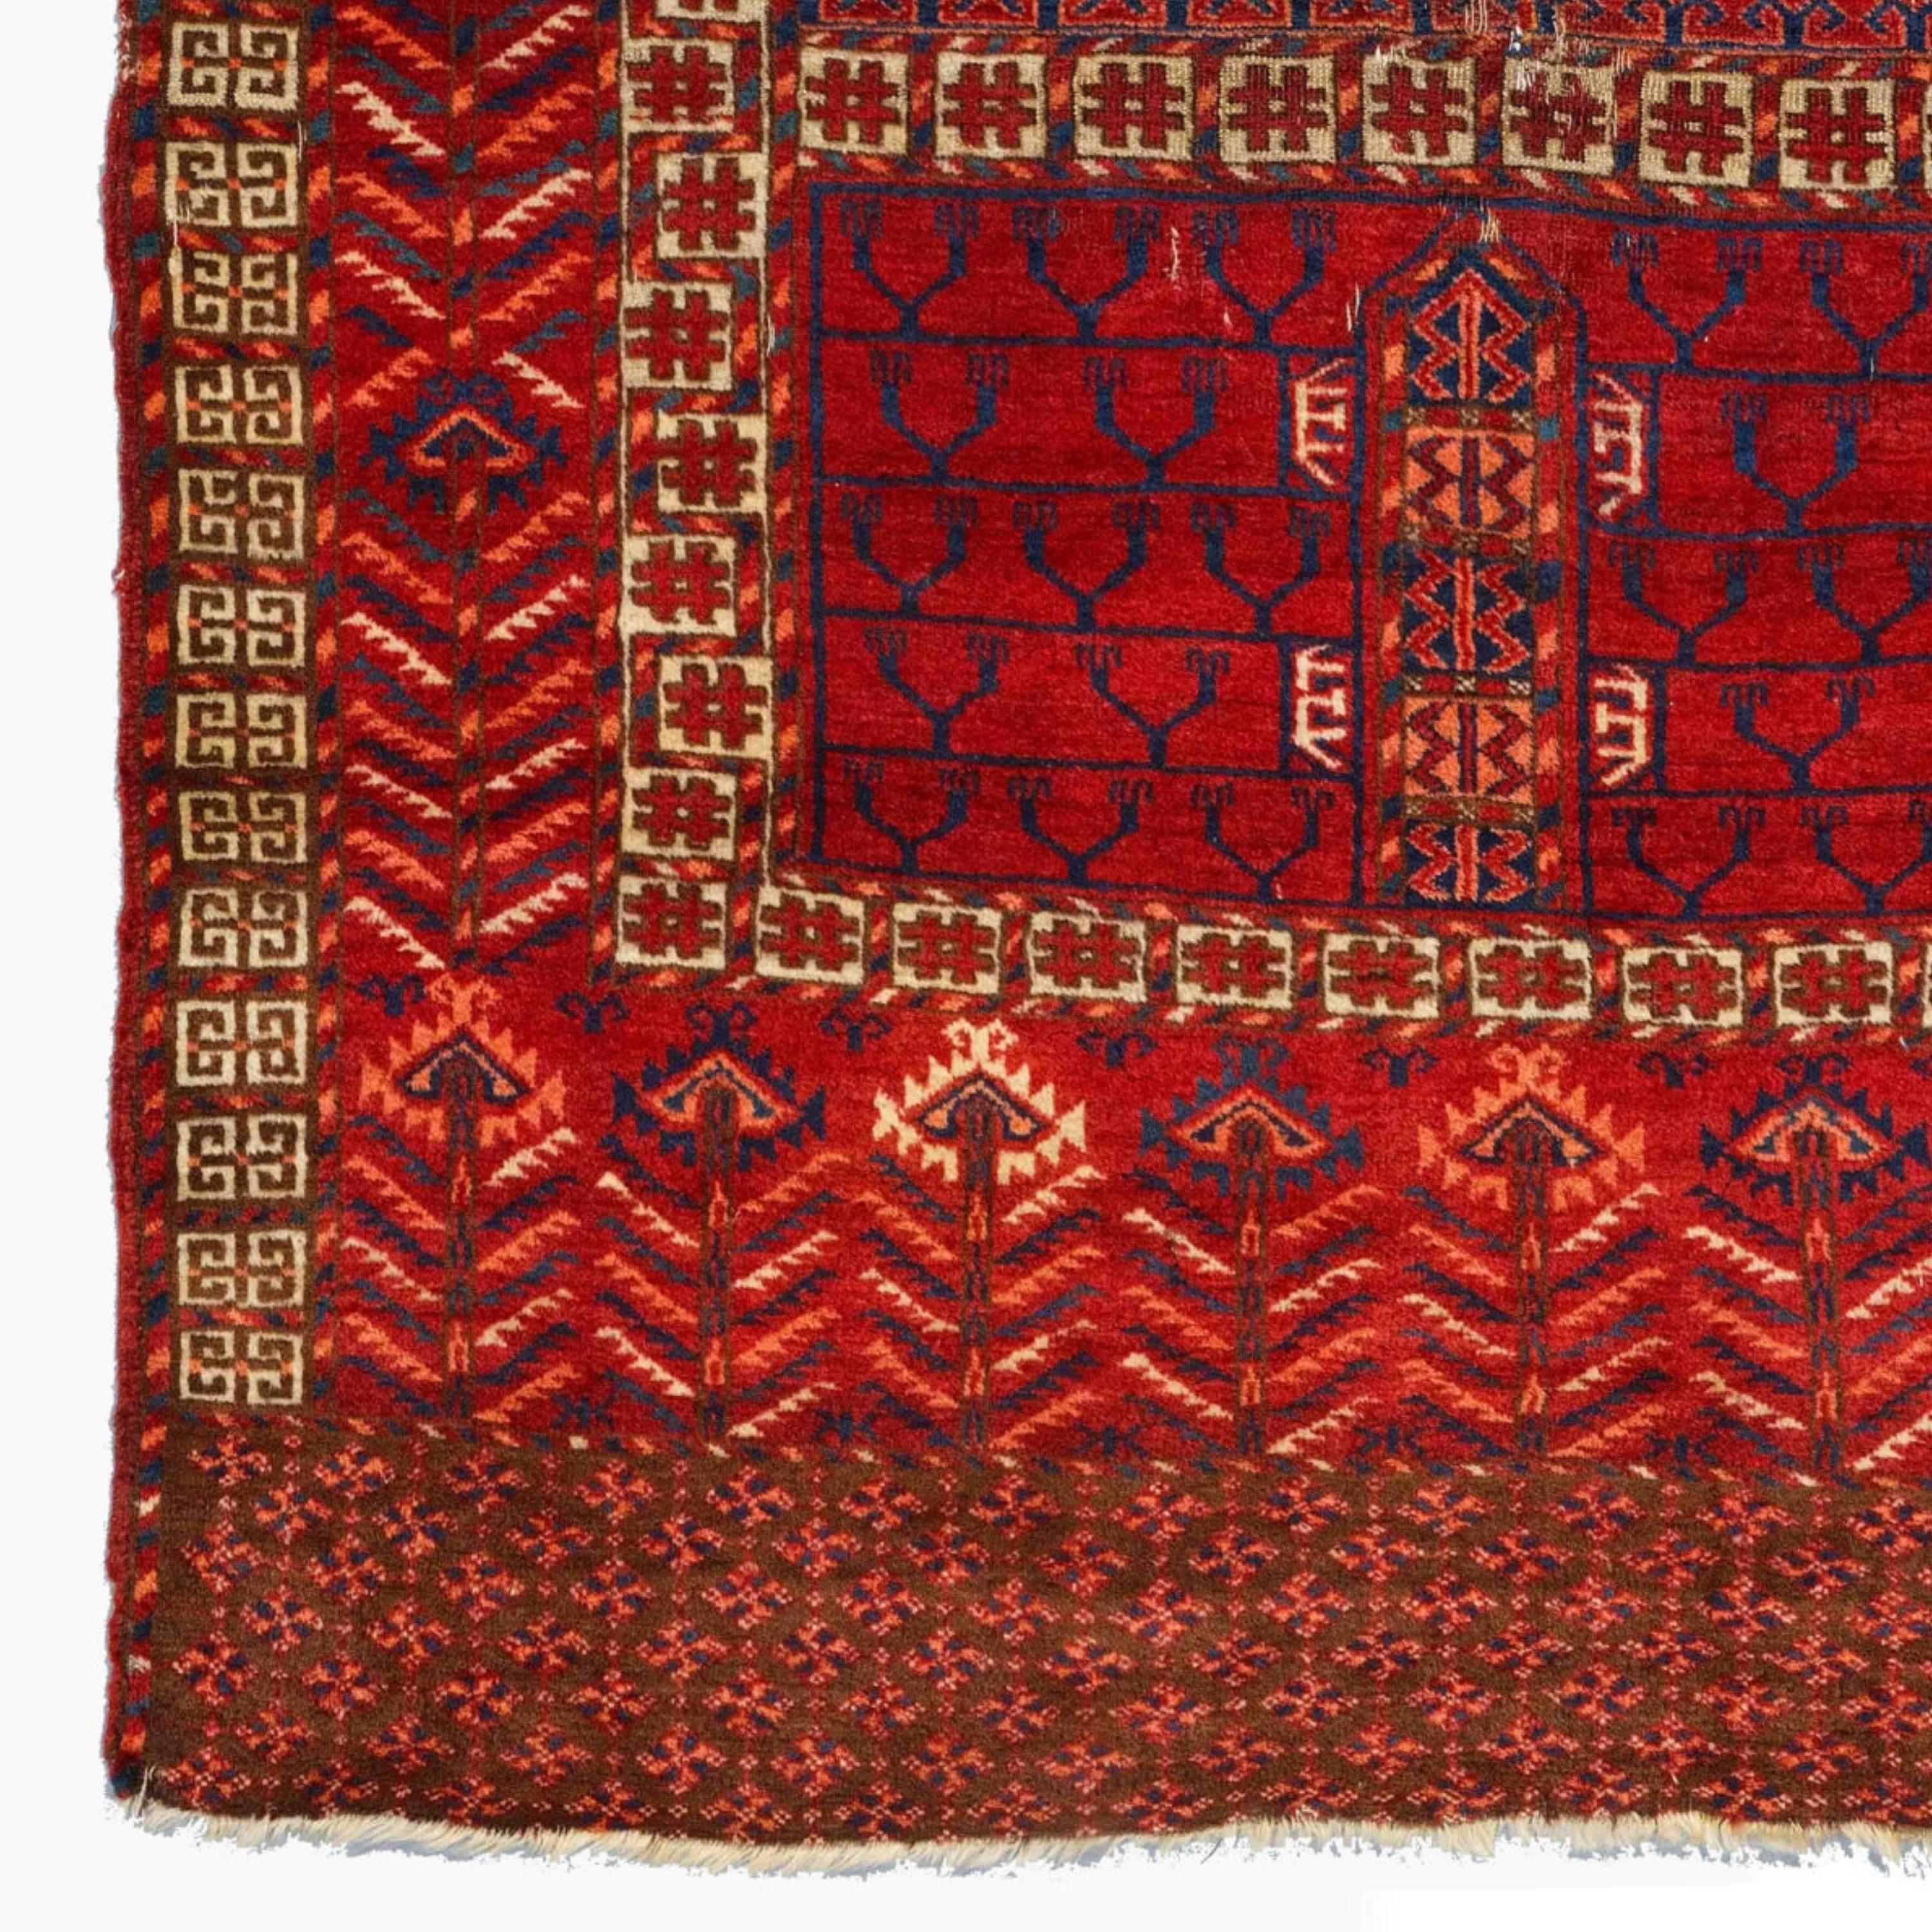 Antique Tekke Ensi - Middle of 19th Century Turkmen Tekke Ensi
Size 118 x 165 cm (3,87 - 5,41 ft)

This elegant mid-19th-century Turkmen Tekke Ensi carpet is a rare work of art. This hand-woven rug in rich red and gold tones showcases the finest